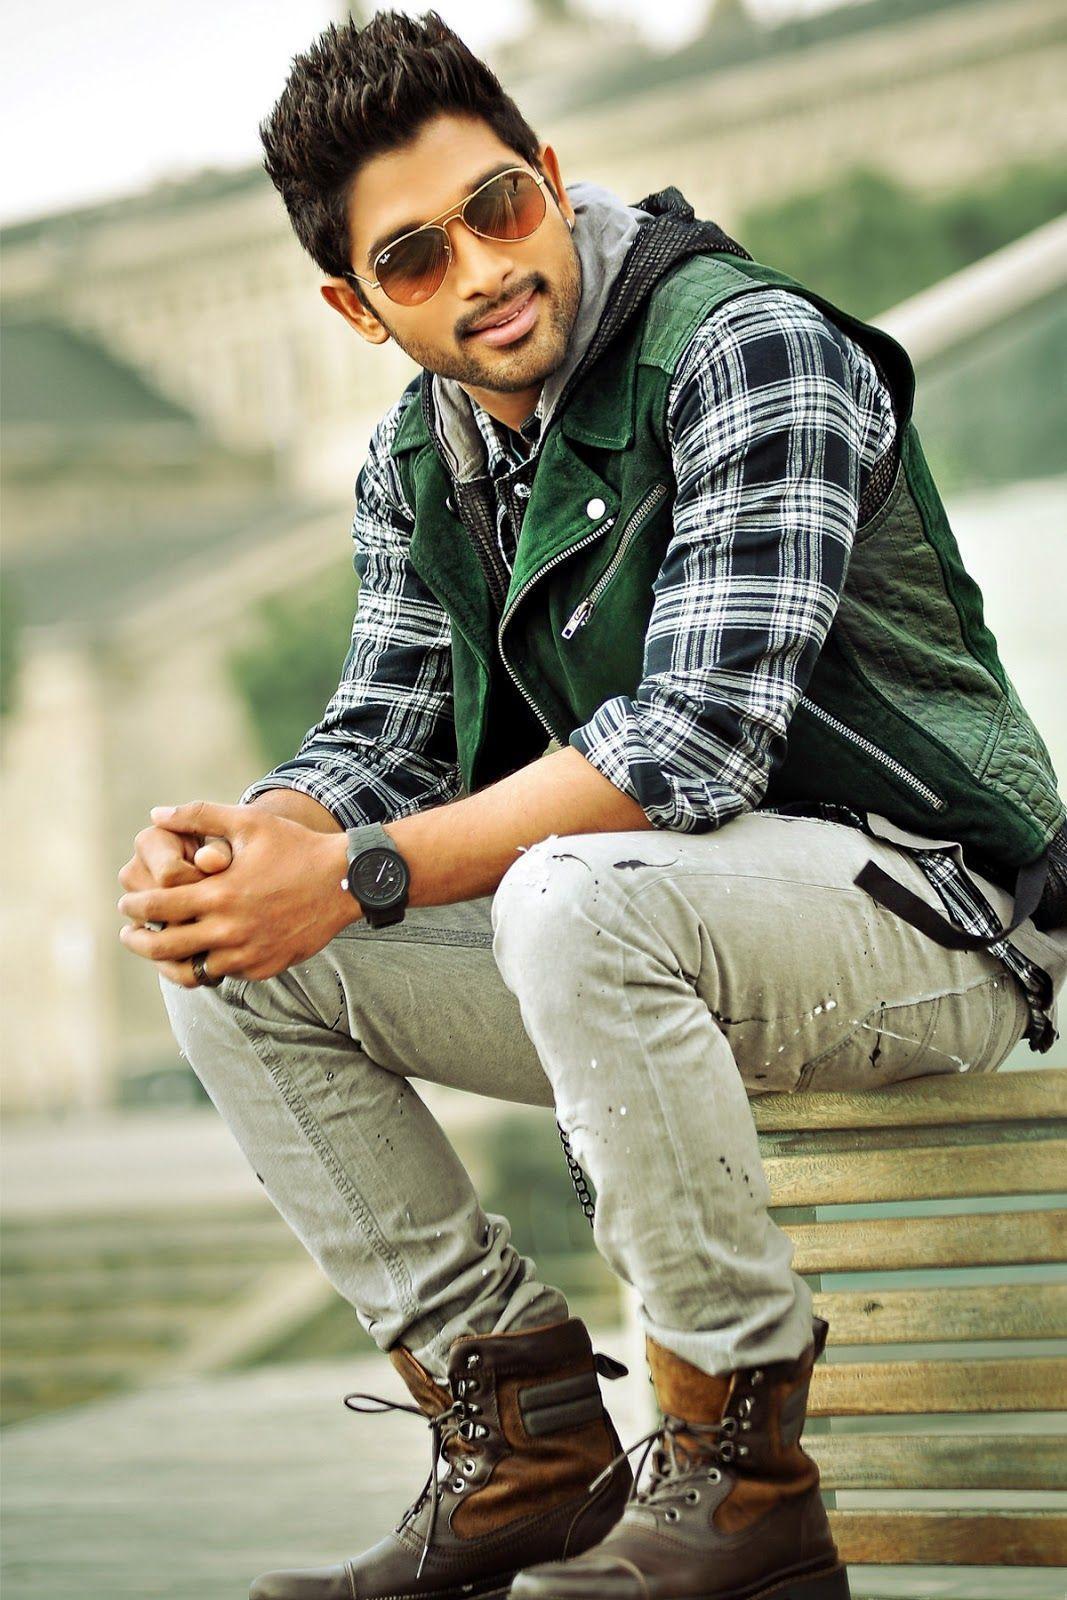 Incredible Collection of Allu Arjun Images for Download – Over 999 Photos in Full 4K Quality